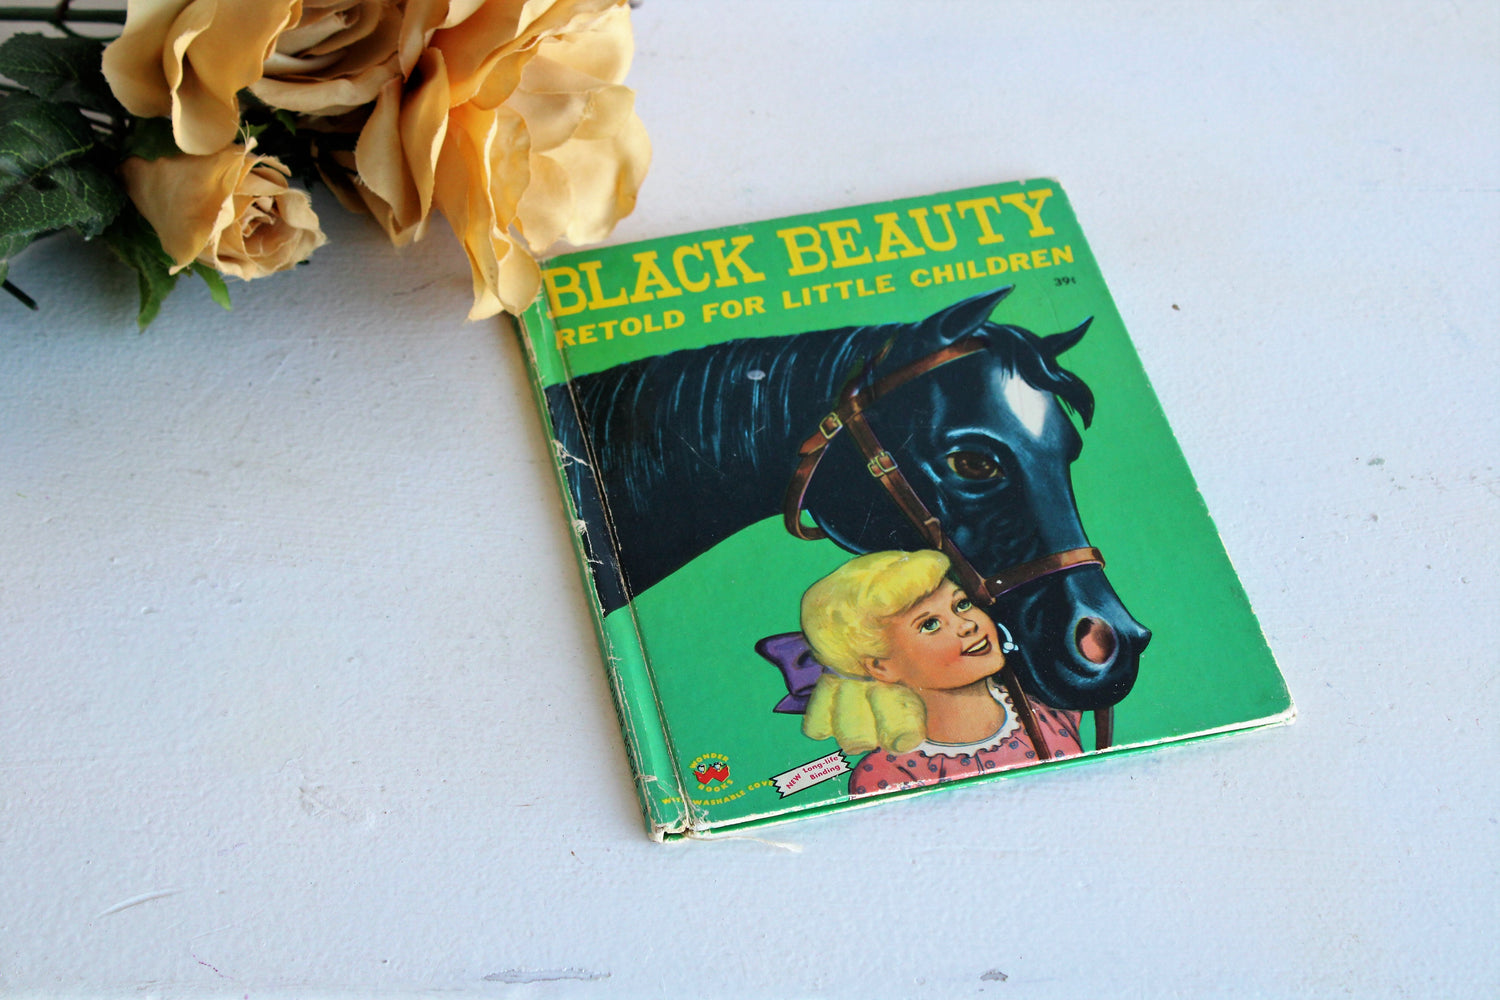 Vintage 1950s Black Beauty Book, Illustrated and Edited For Children